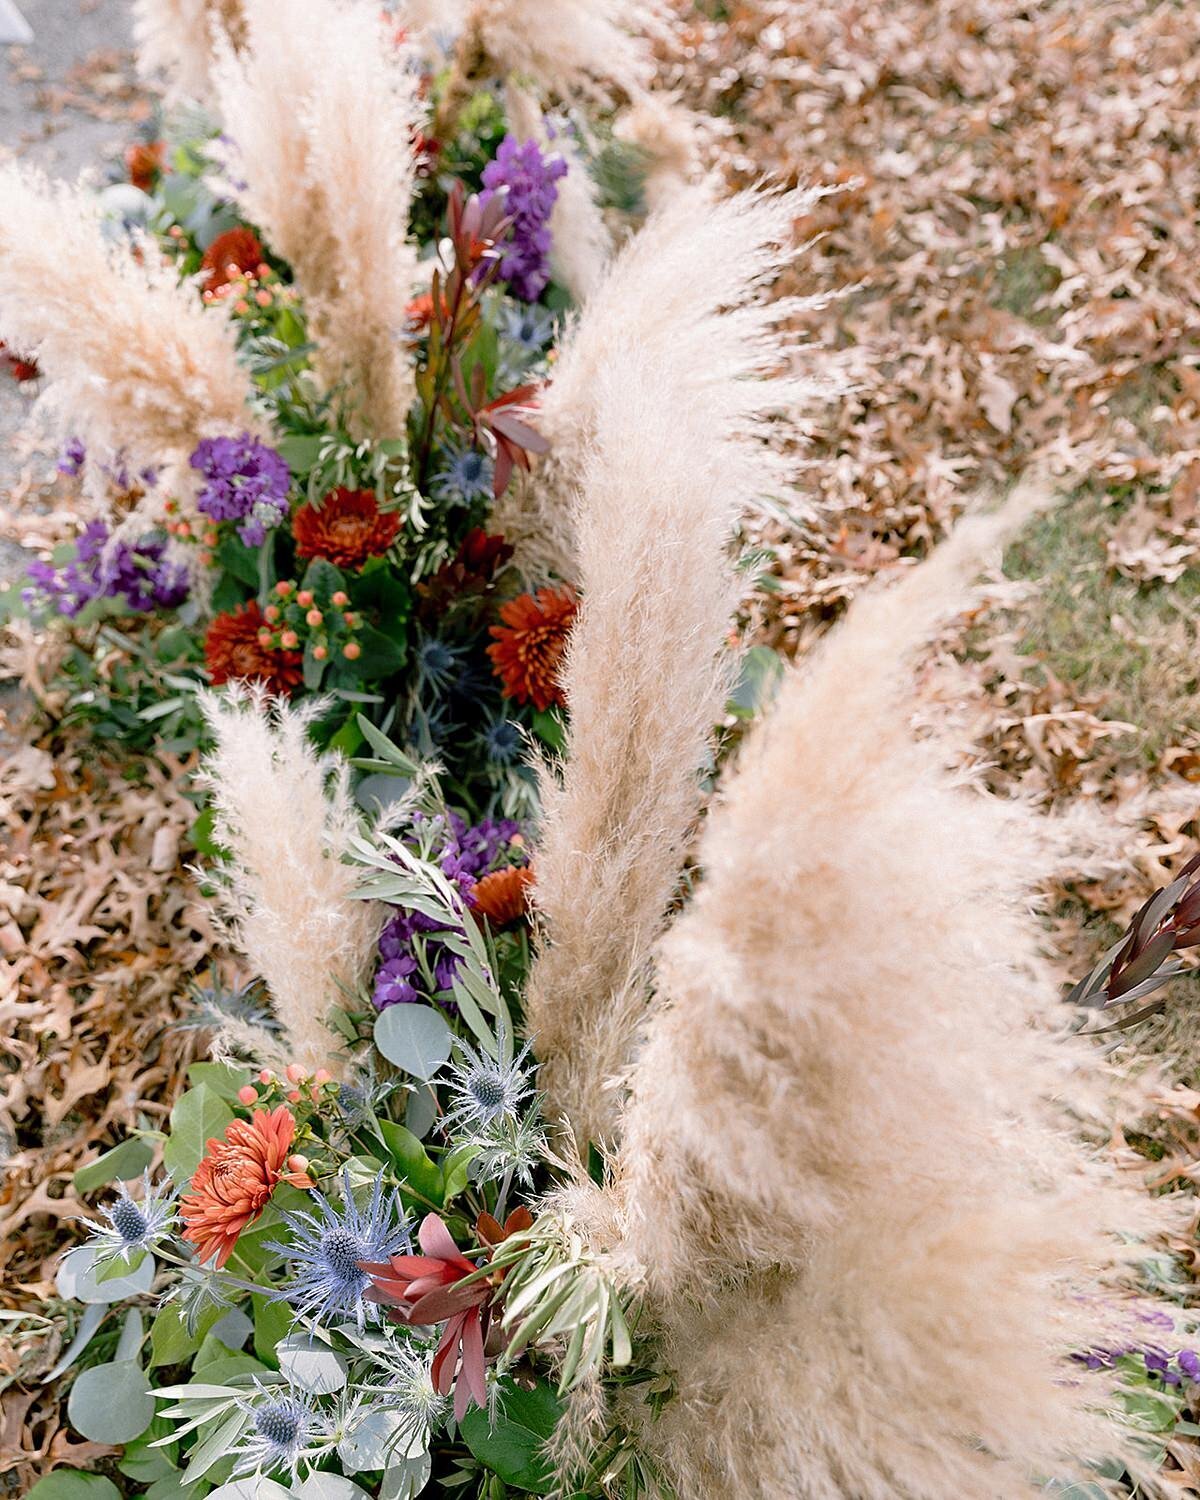 A long floral arrangement sits on the floor leading up to the ceremony arbor. The floral centerpiece features pampas grass, blue thistle, silver dollar eucalyptus, red mums, orange mums, purple flowers and yellow flowers.